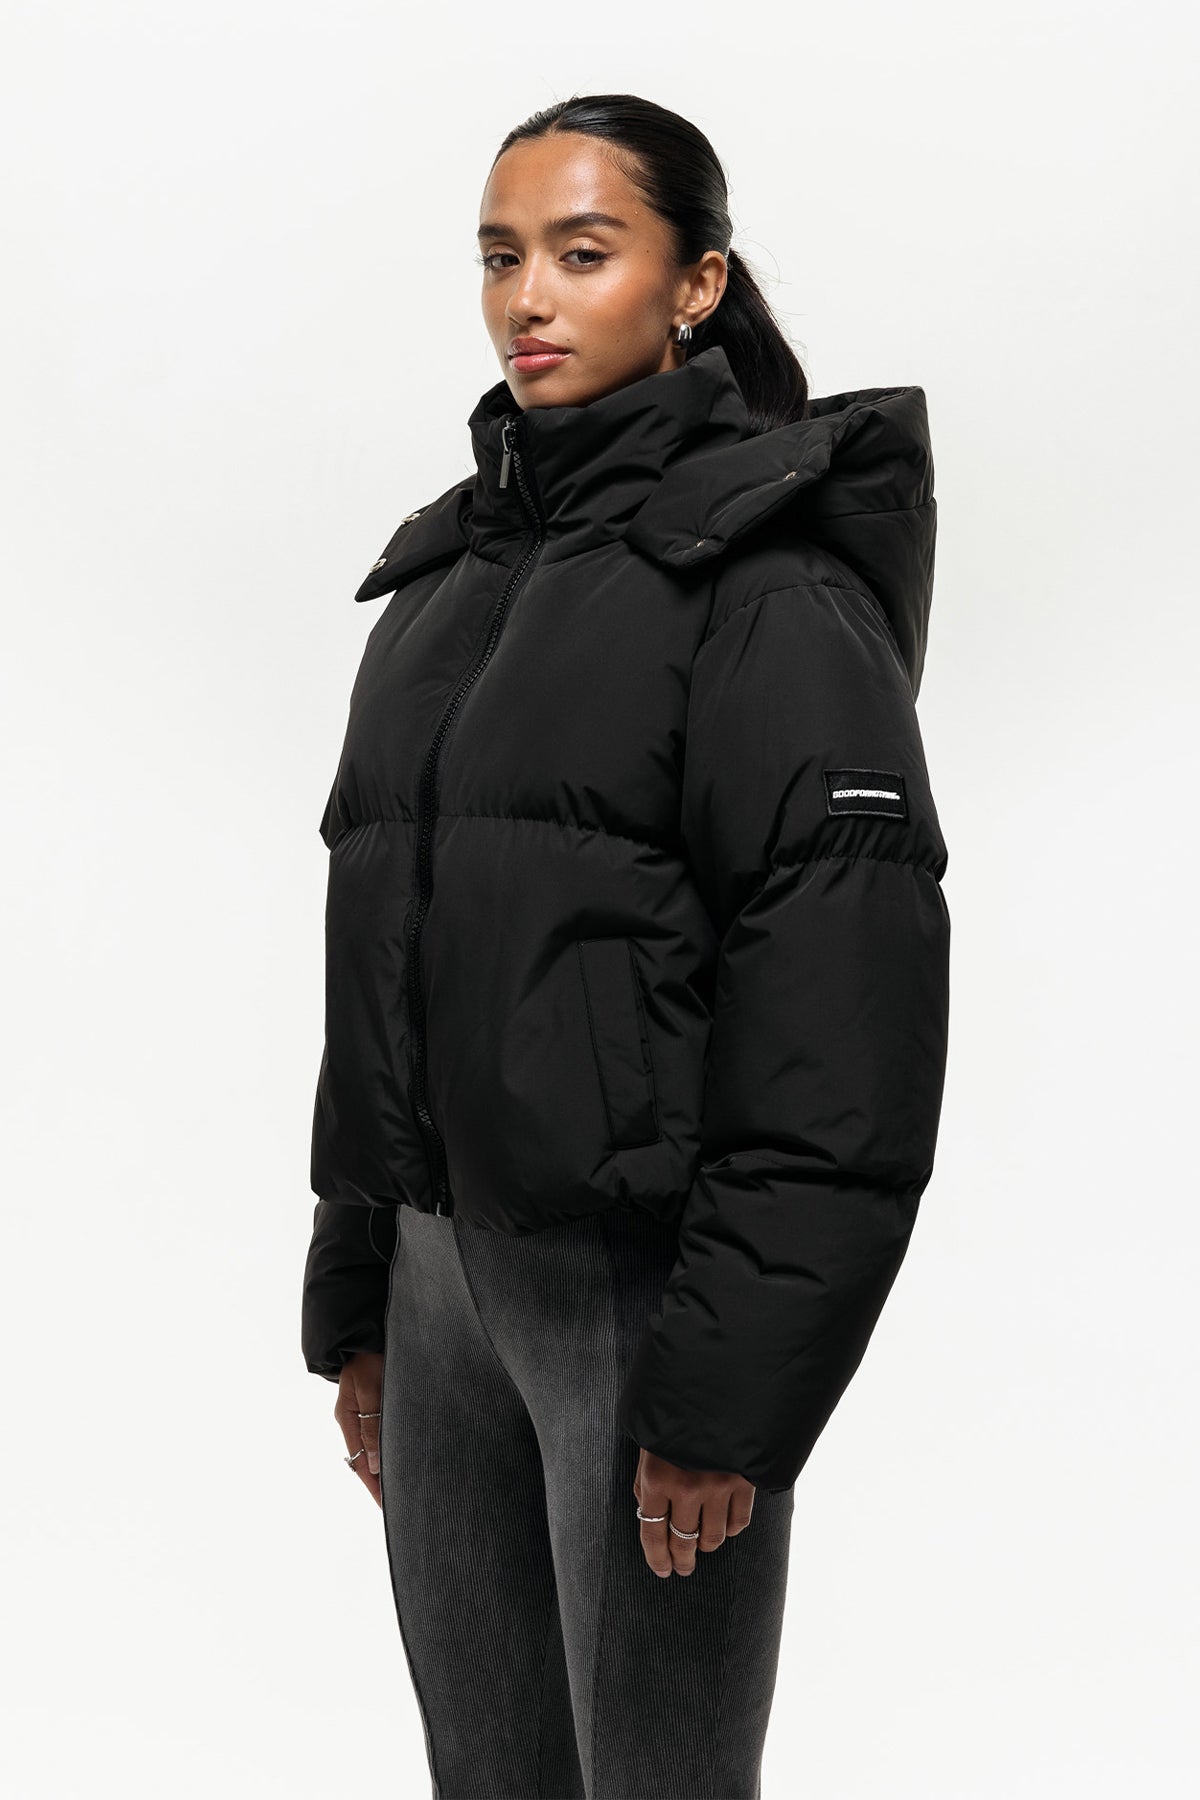 Luxe Black Cropped Puffer Jacket